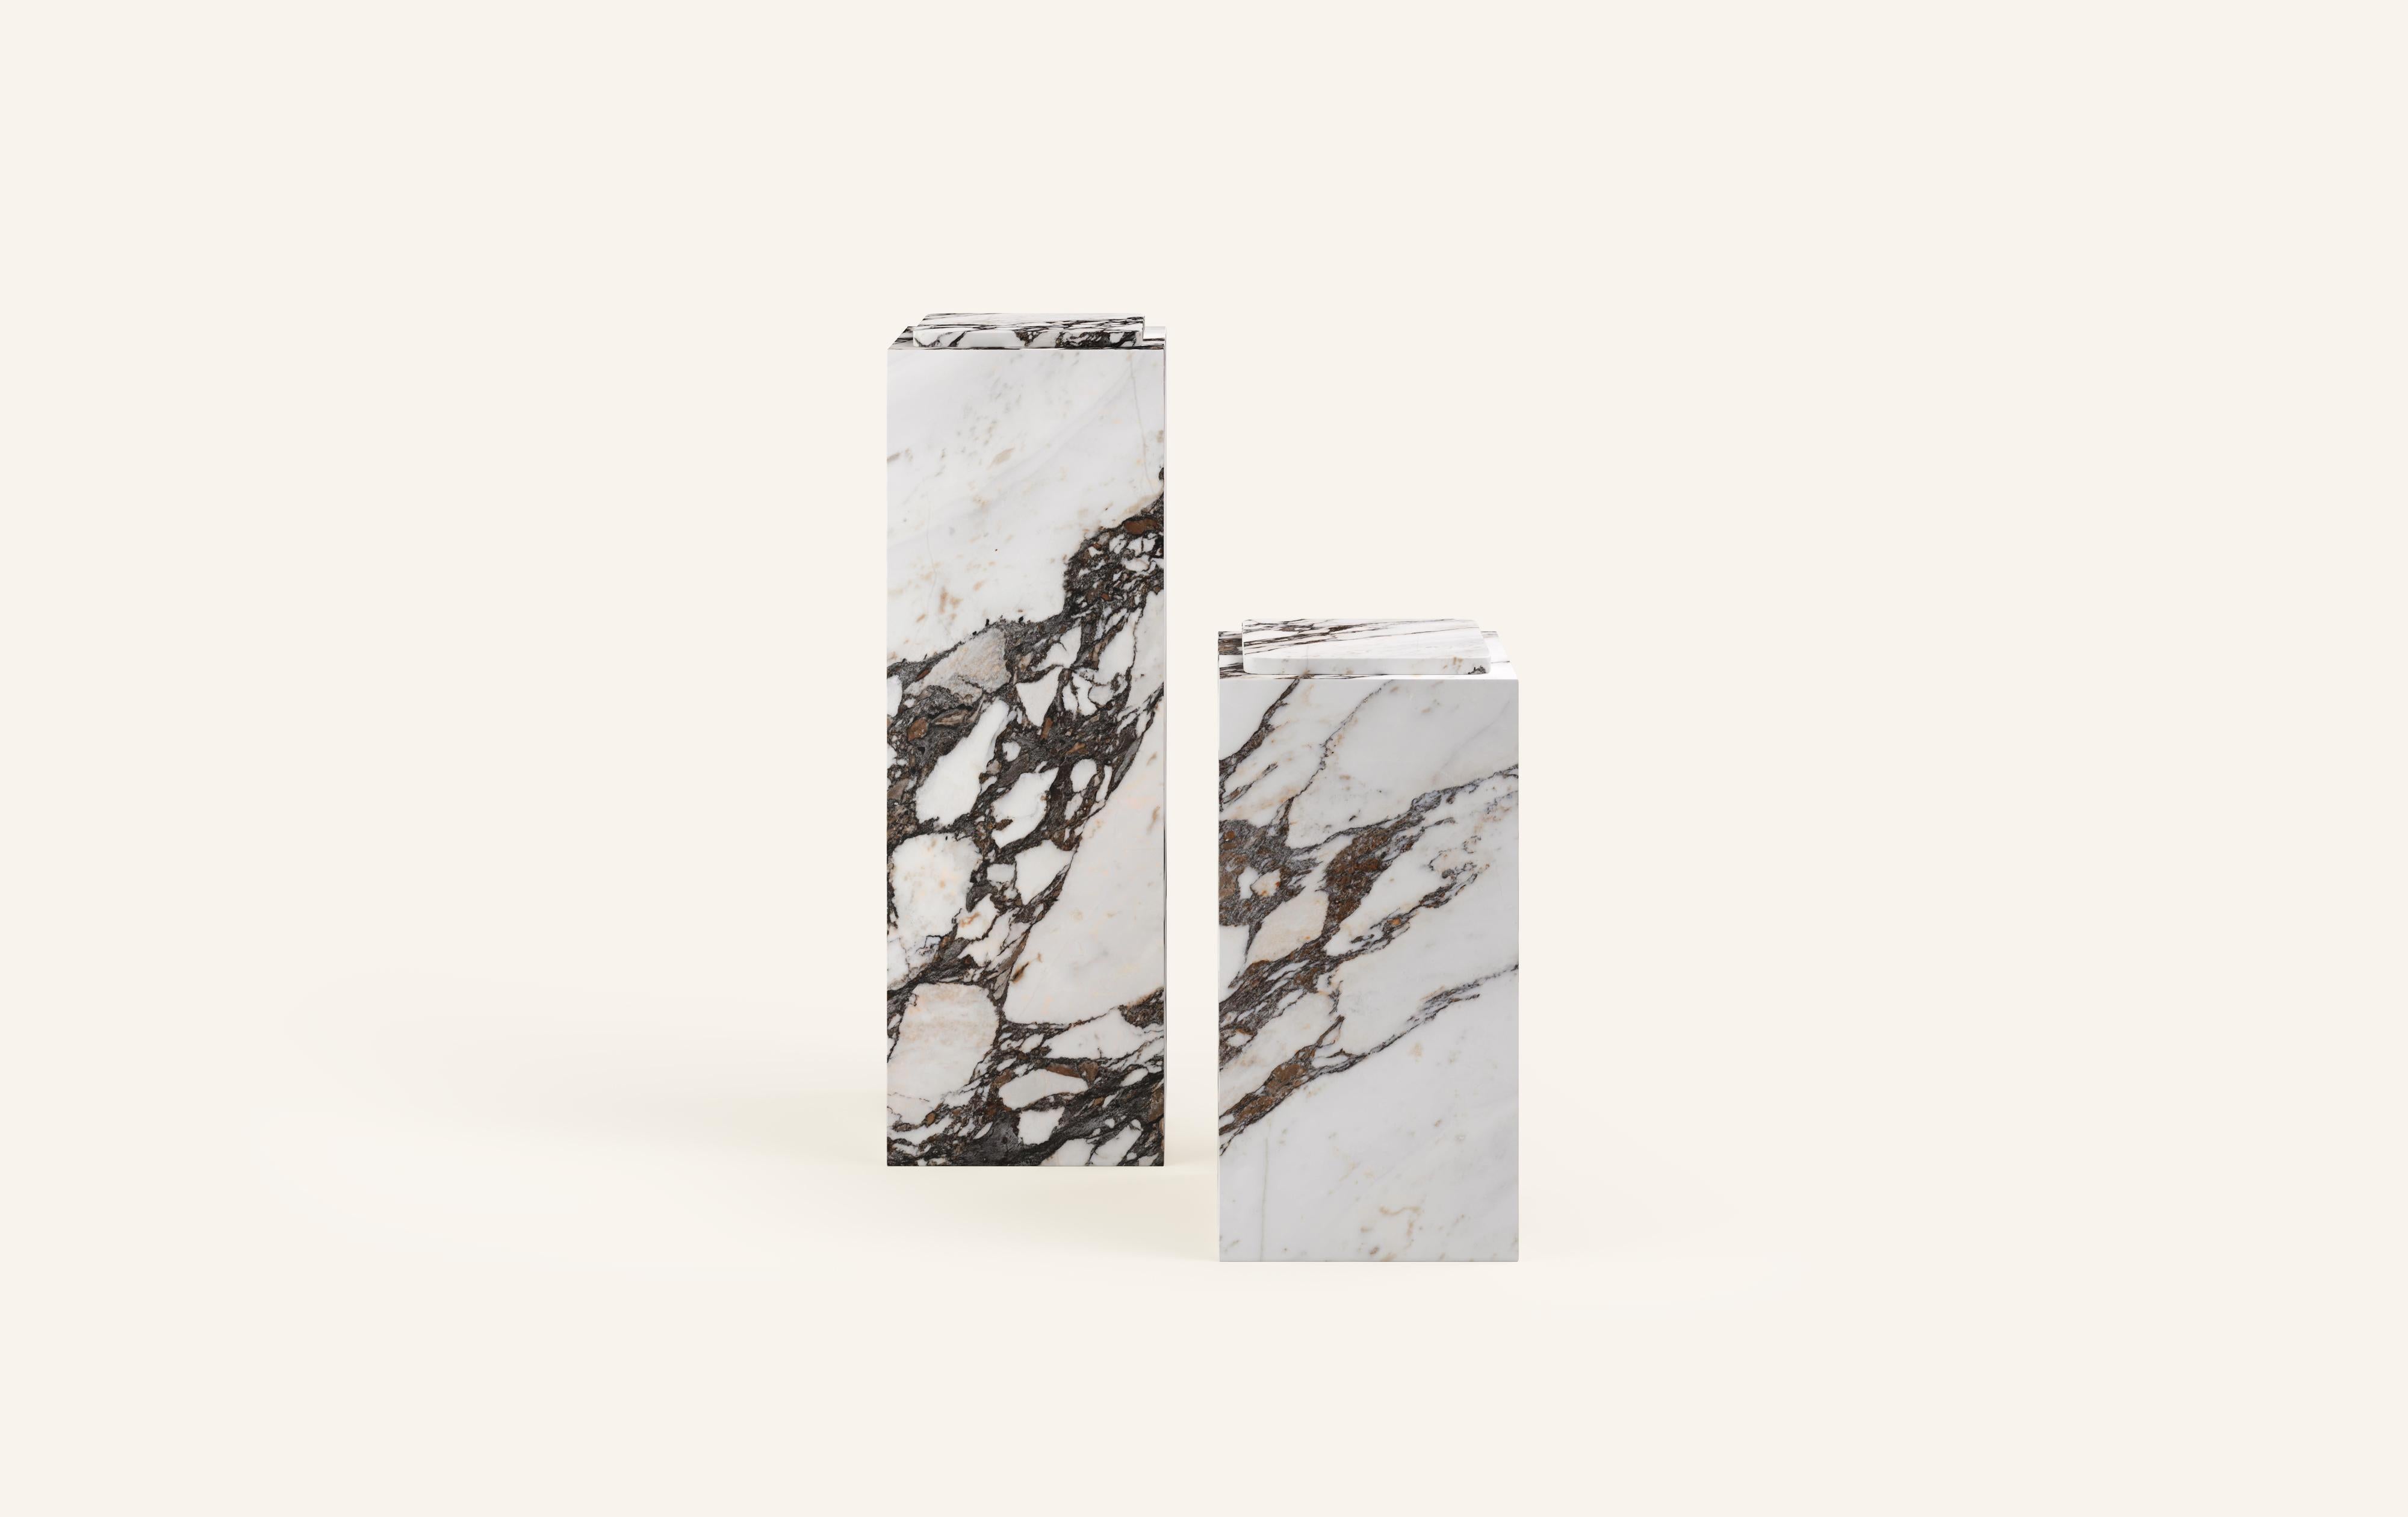 MONOLITHIC FORMS SOFTENED BY GENTLE EDGES. WITH ITS BOLD MARBLE PATTERNS CUBO IS AS VERSATILE AS IT IS STRIKING.

DIMENSIONS (PEDESTALS SOLD INDIVIDUALLY):
12”L x 12”W x 24”H: 
- 3/4